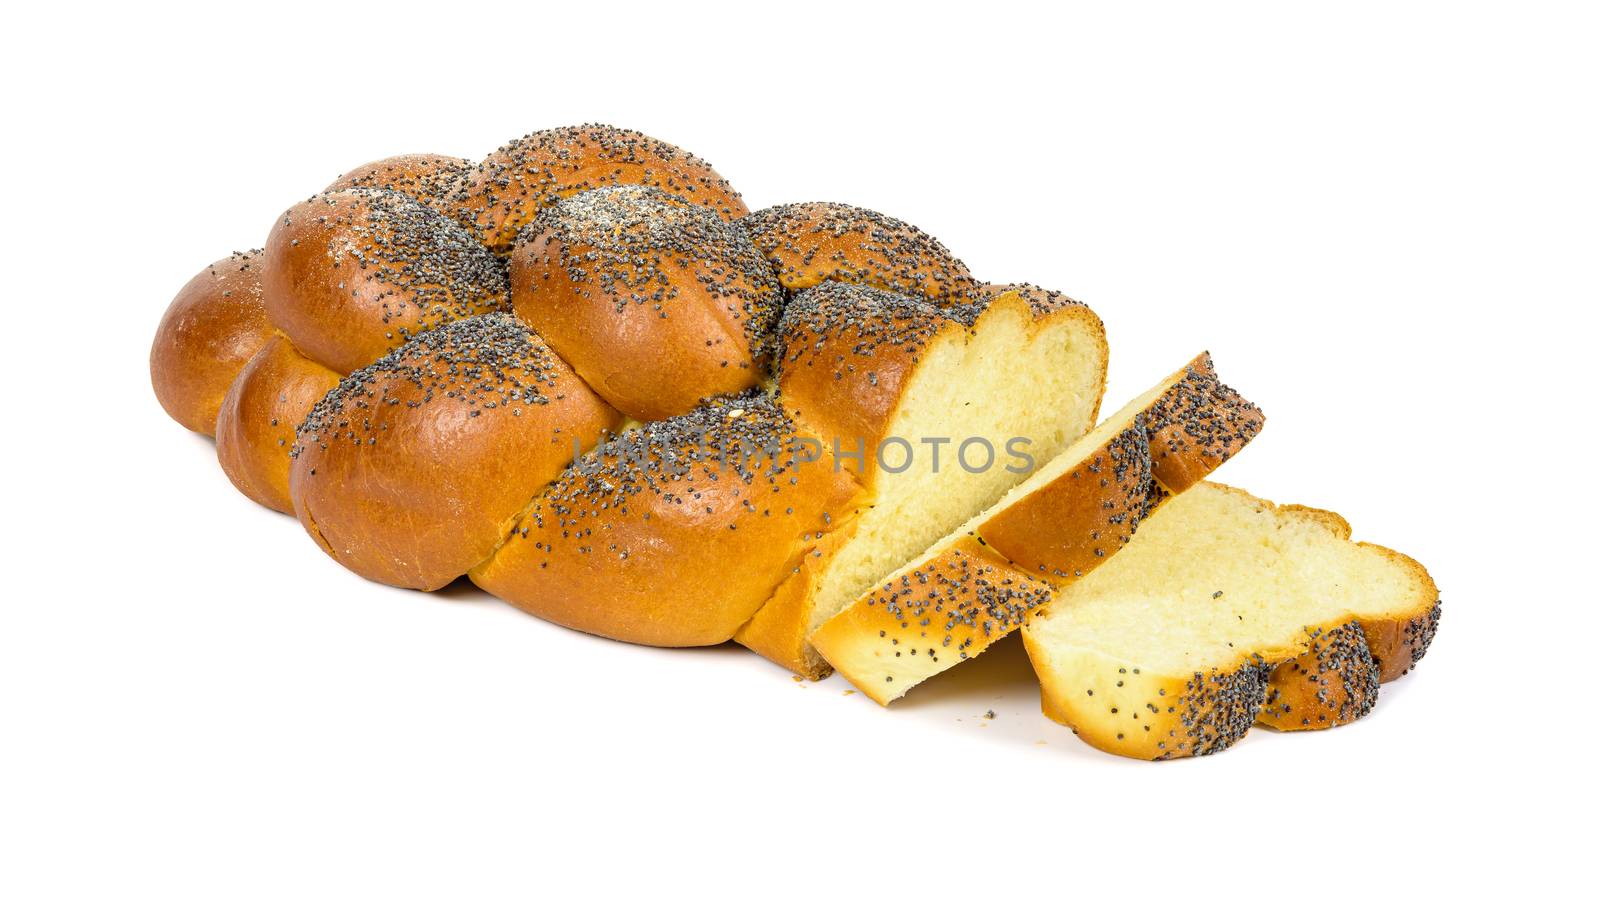 Sliced challah bread on white background by mkos83